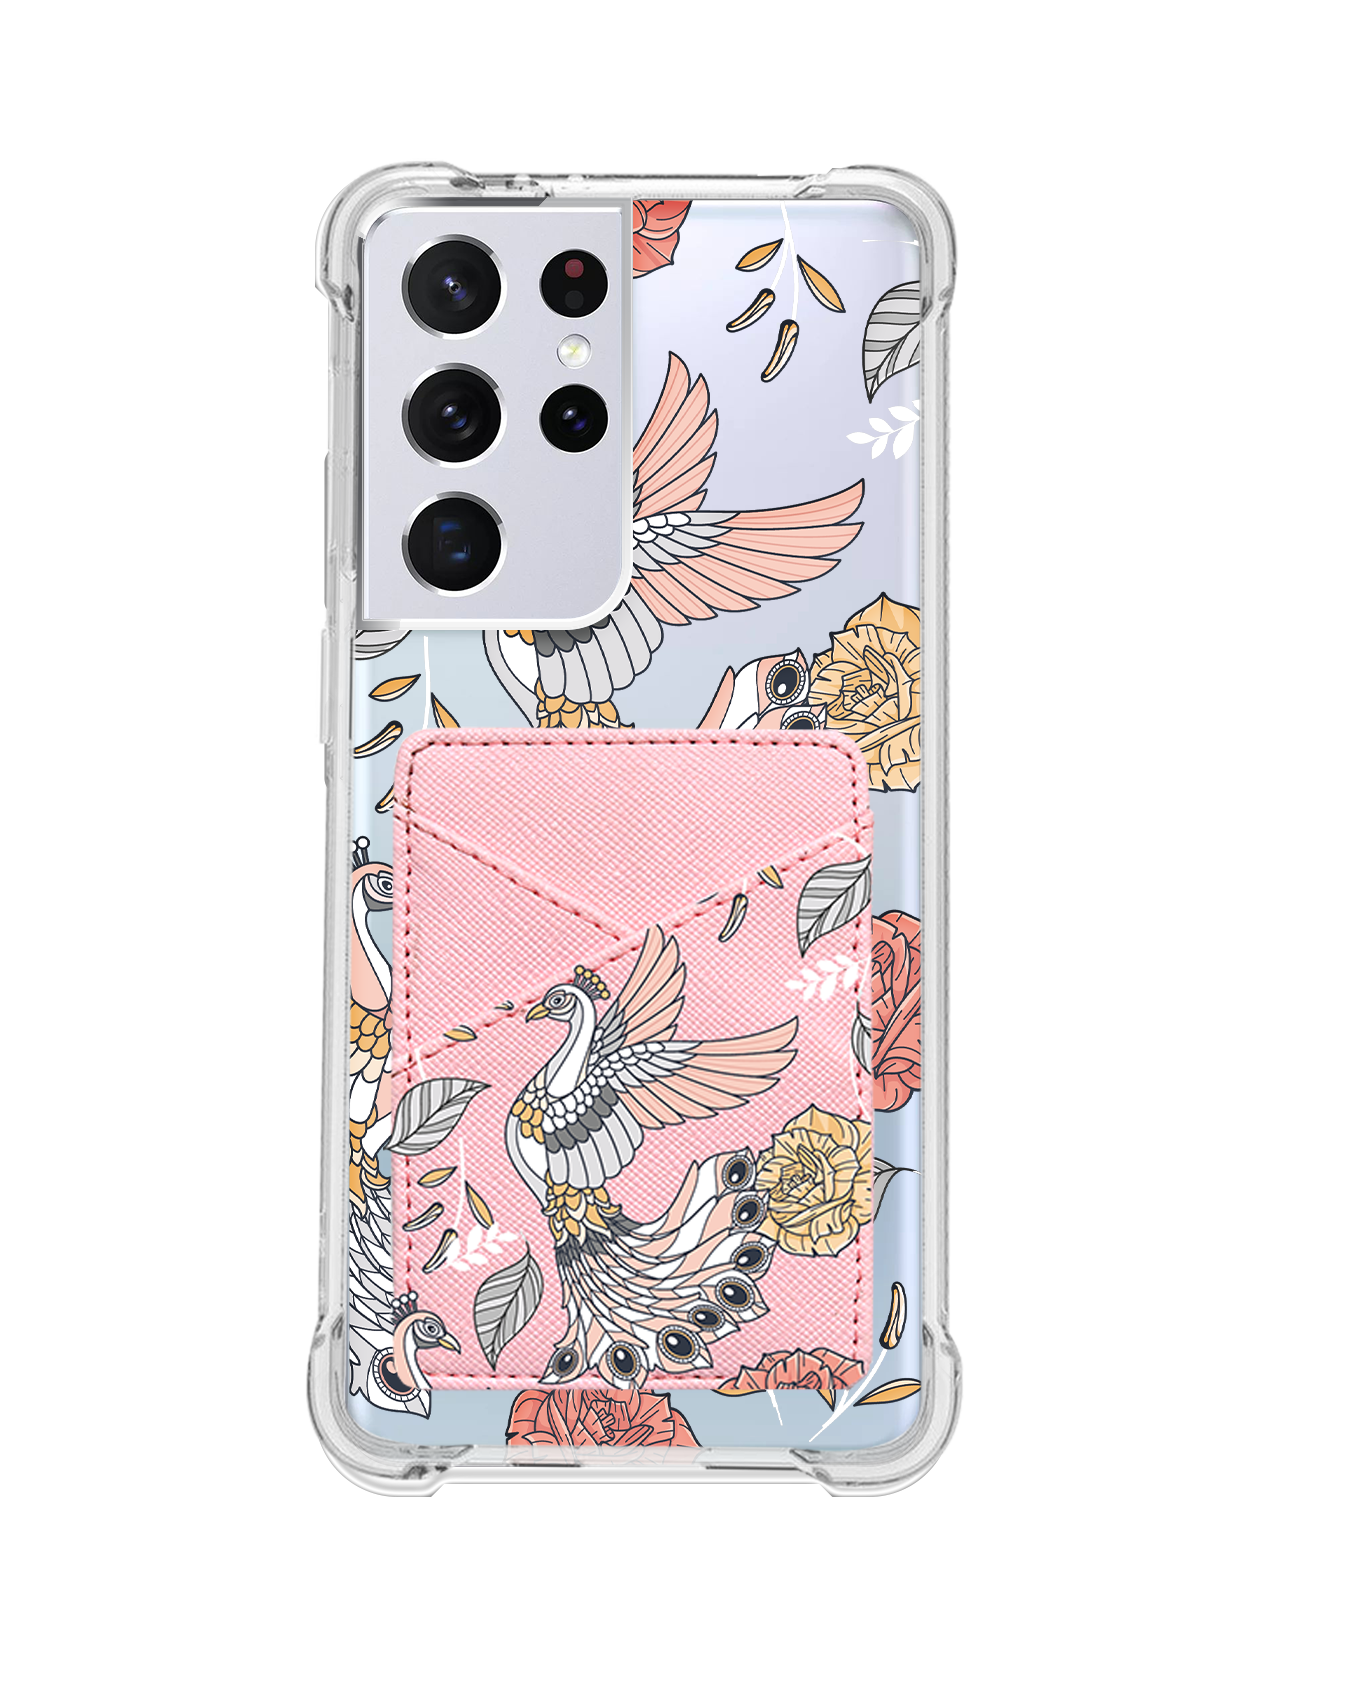 Android Phone Wallet Case - Bird of Paradise 1.0